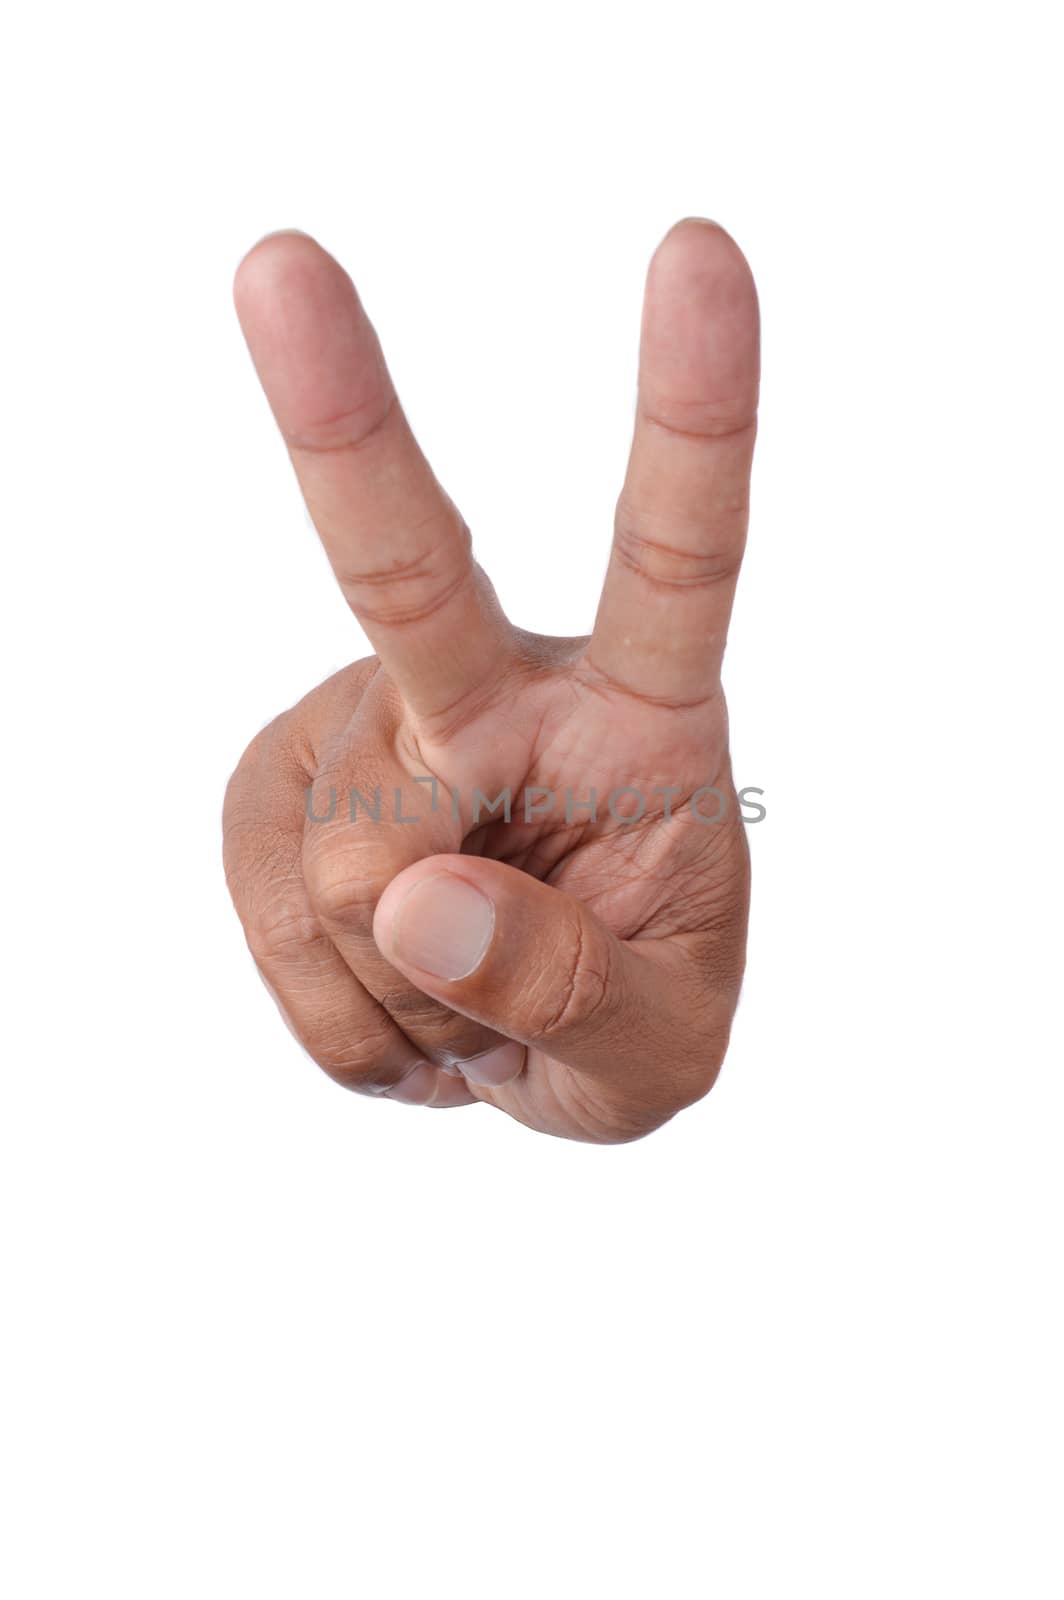 victory or two hand sign on white background